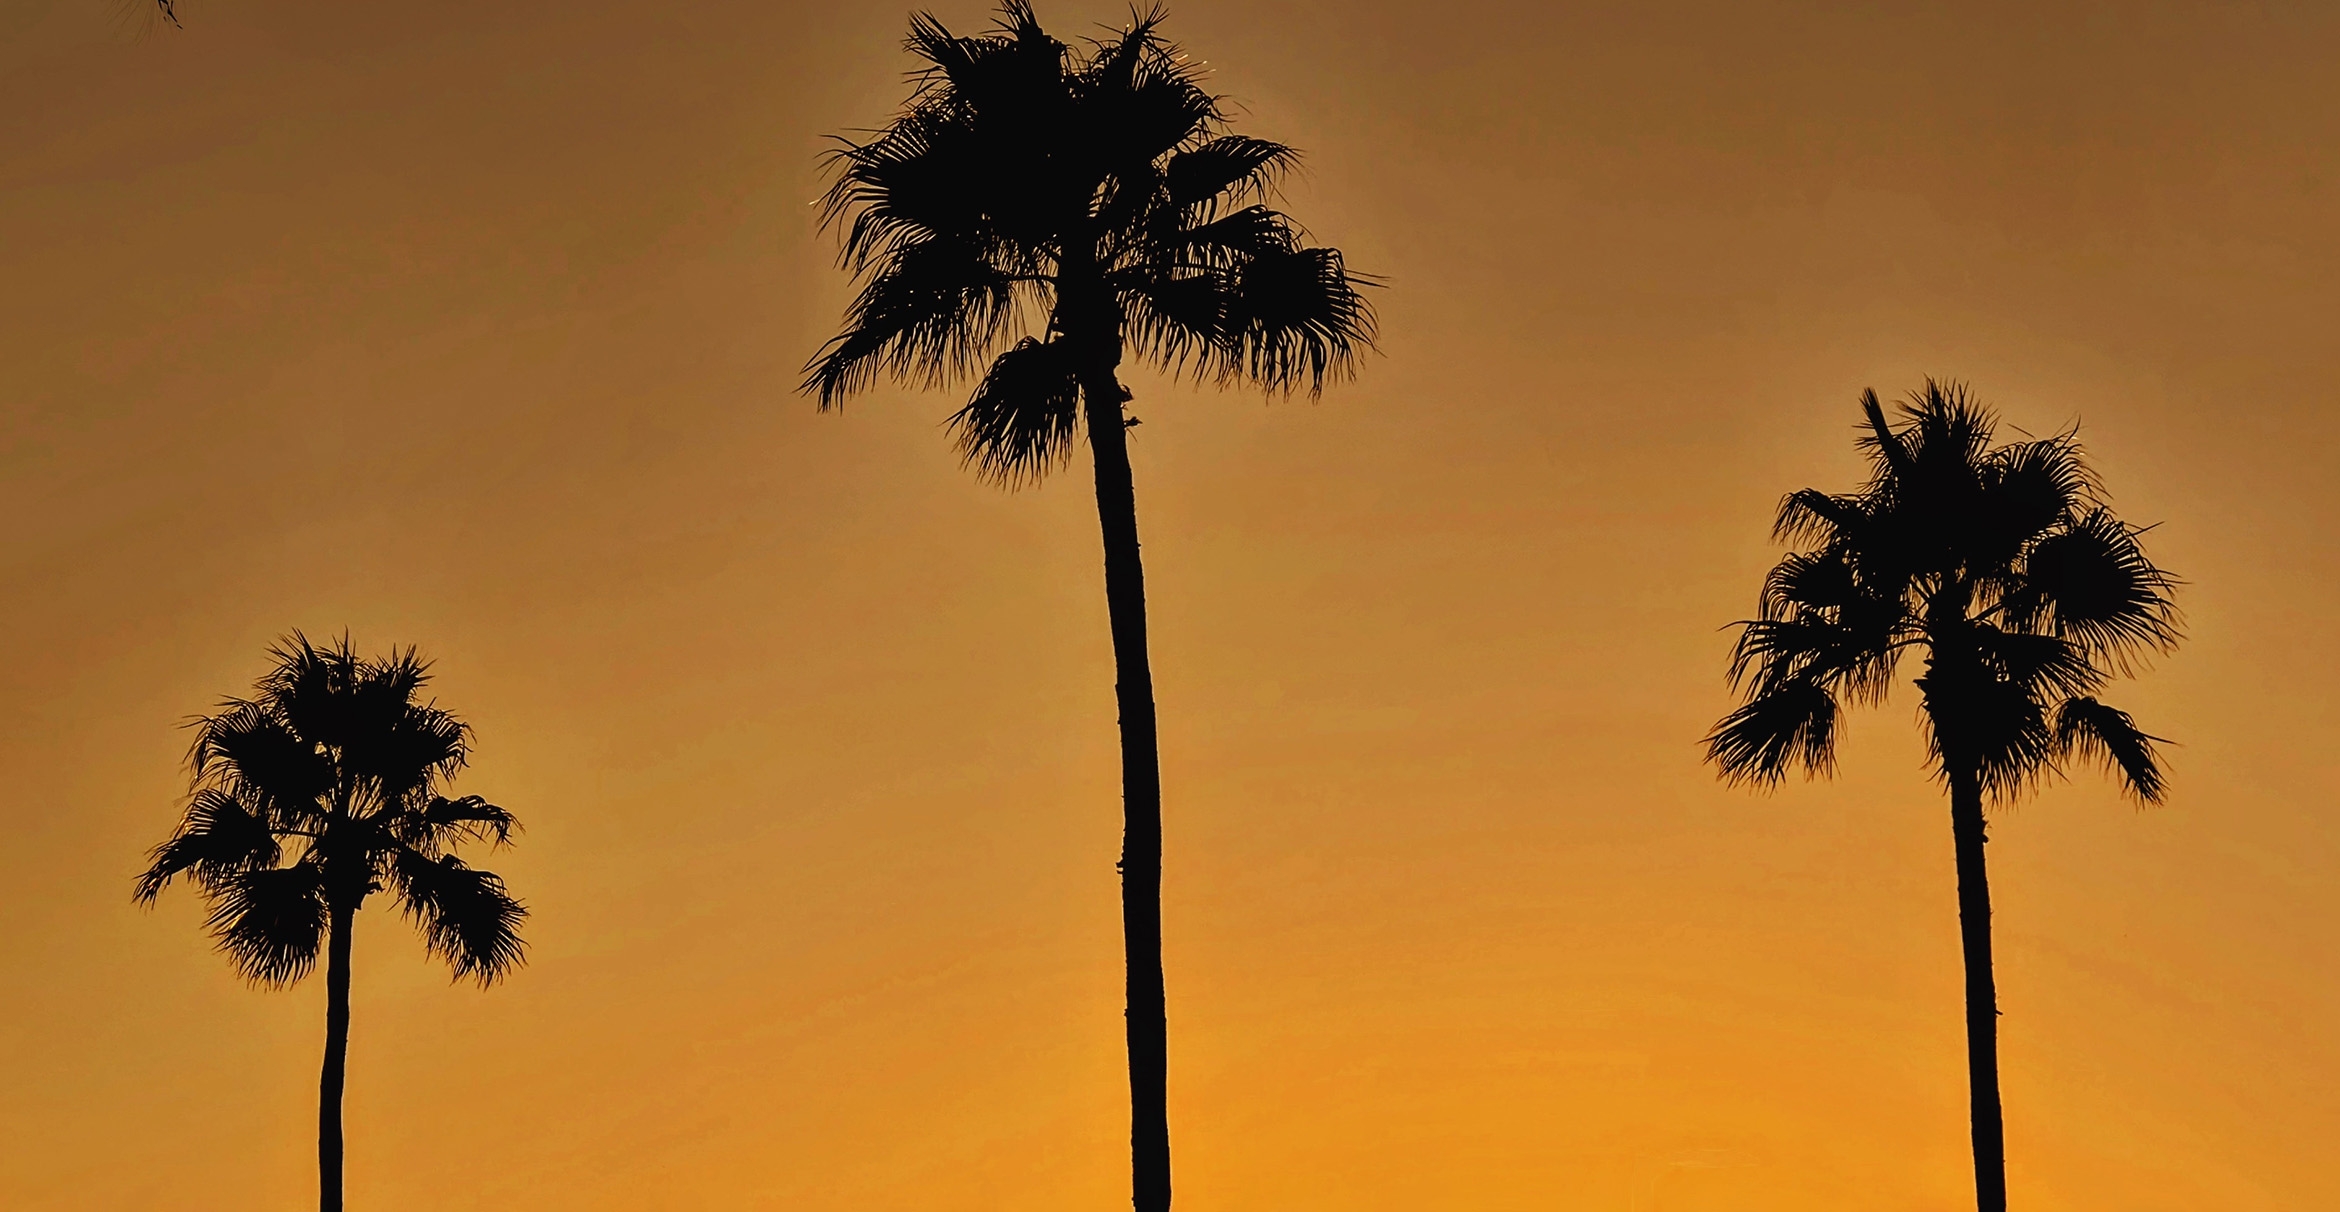 Silhouette of three palm trees against a golden sunset